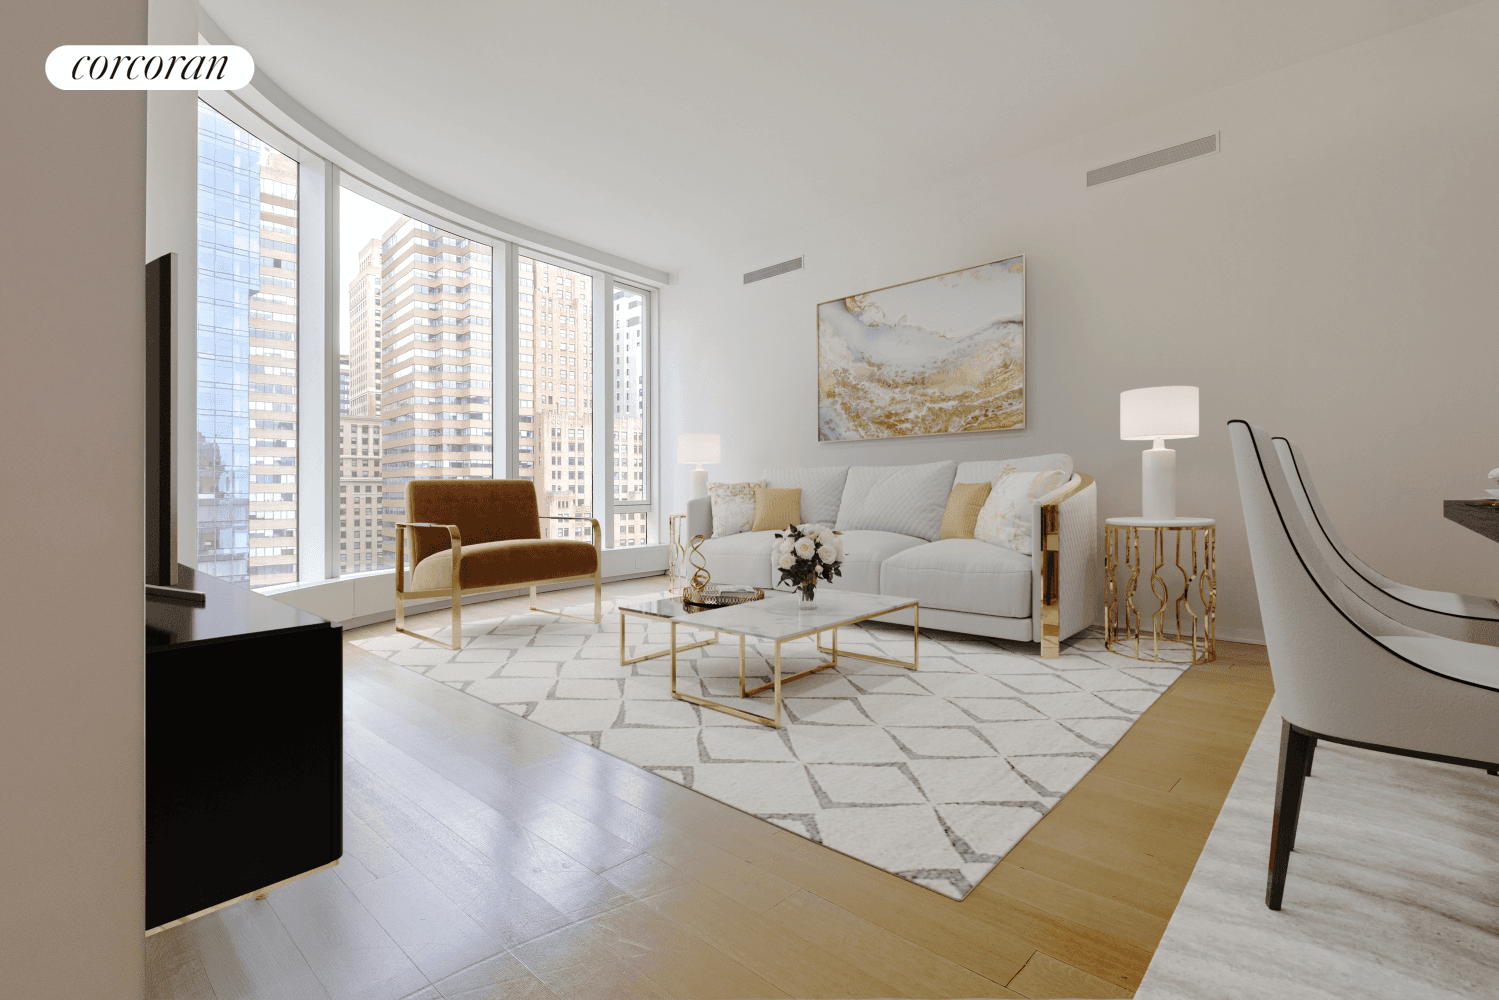 Welcome to your warm and Sunny home in this beautiful luxury building designed by famous architect Helmut Jahn, Sunlight from the floor to ceiling windows fills up the whole apt, ...